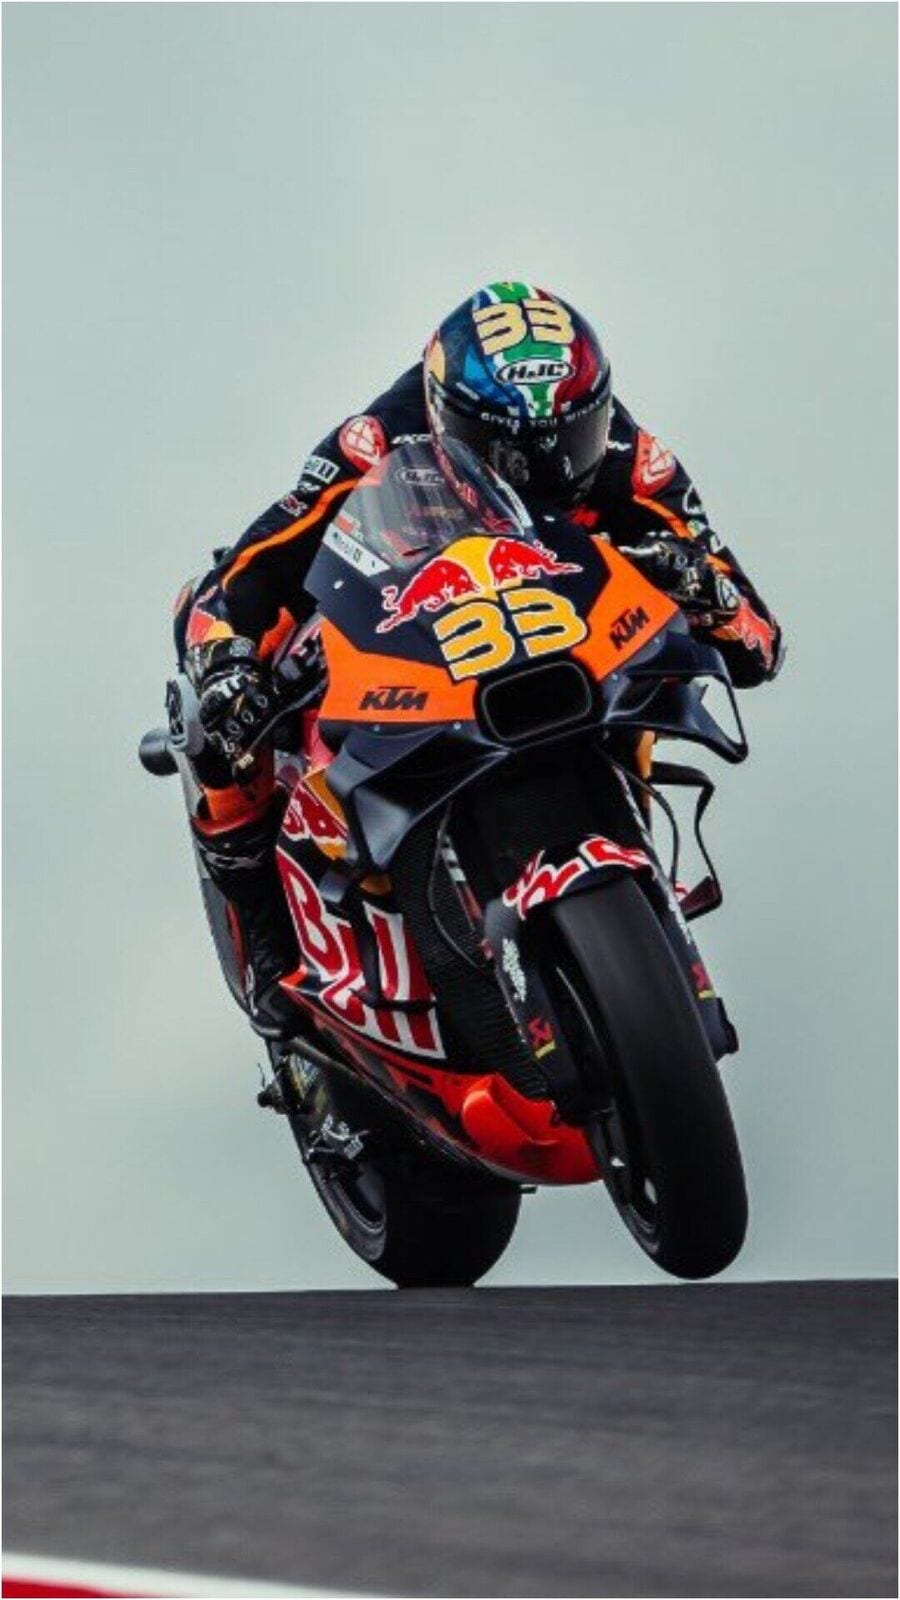 Planning to watch the 2023 MotoGP season in India? Heres where you can stream online HT Auto